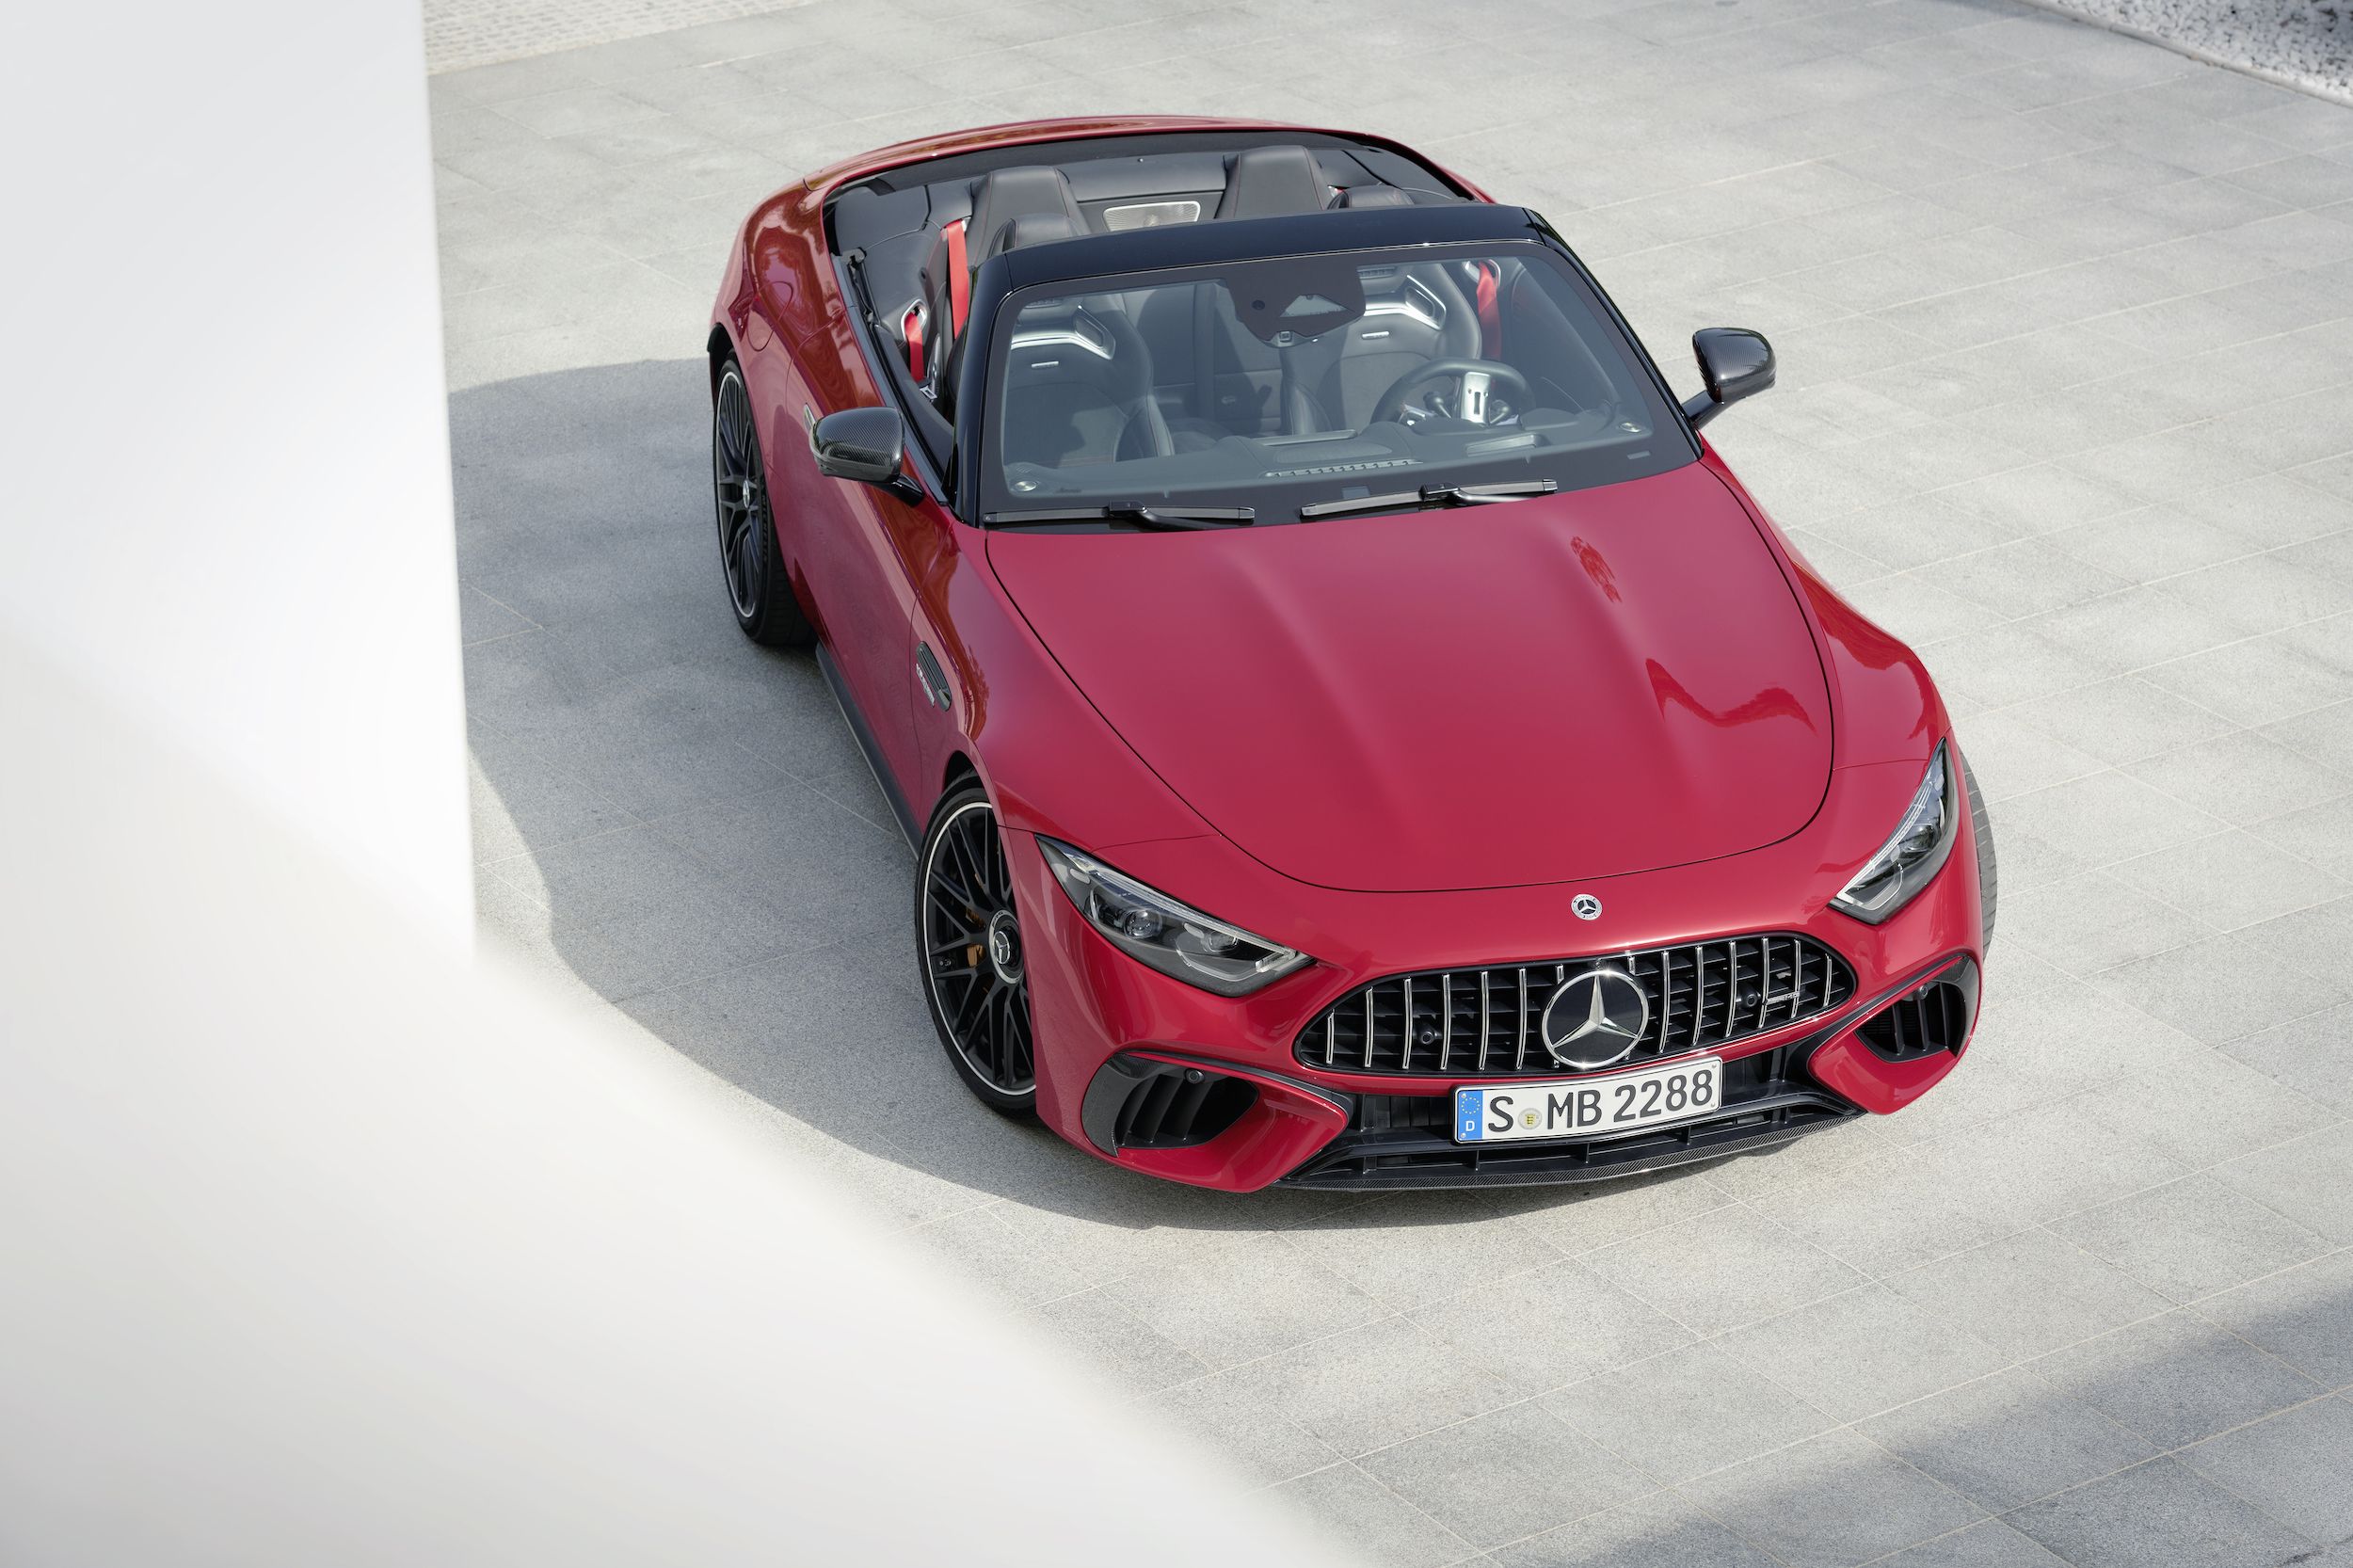 2022 Mercedes-AMG SL: Everything You Need to Know